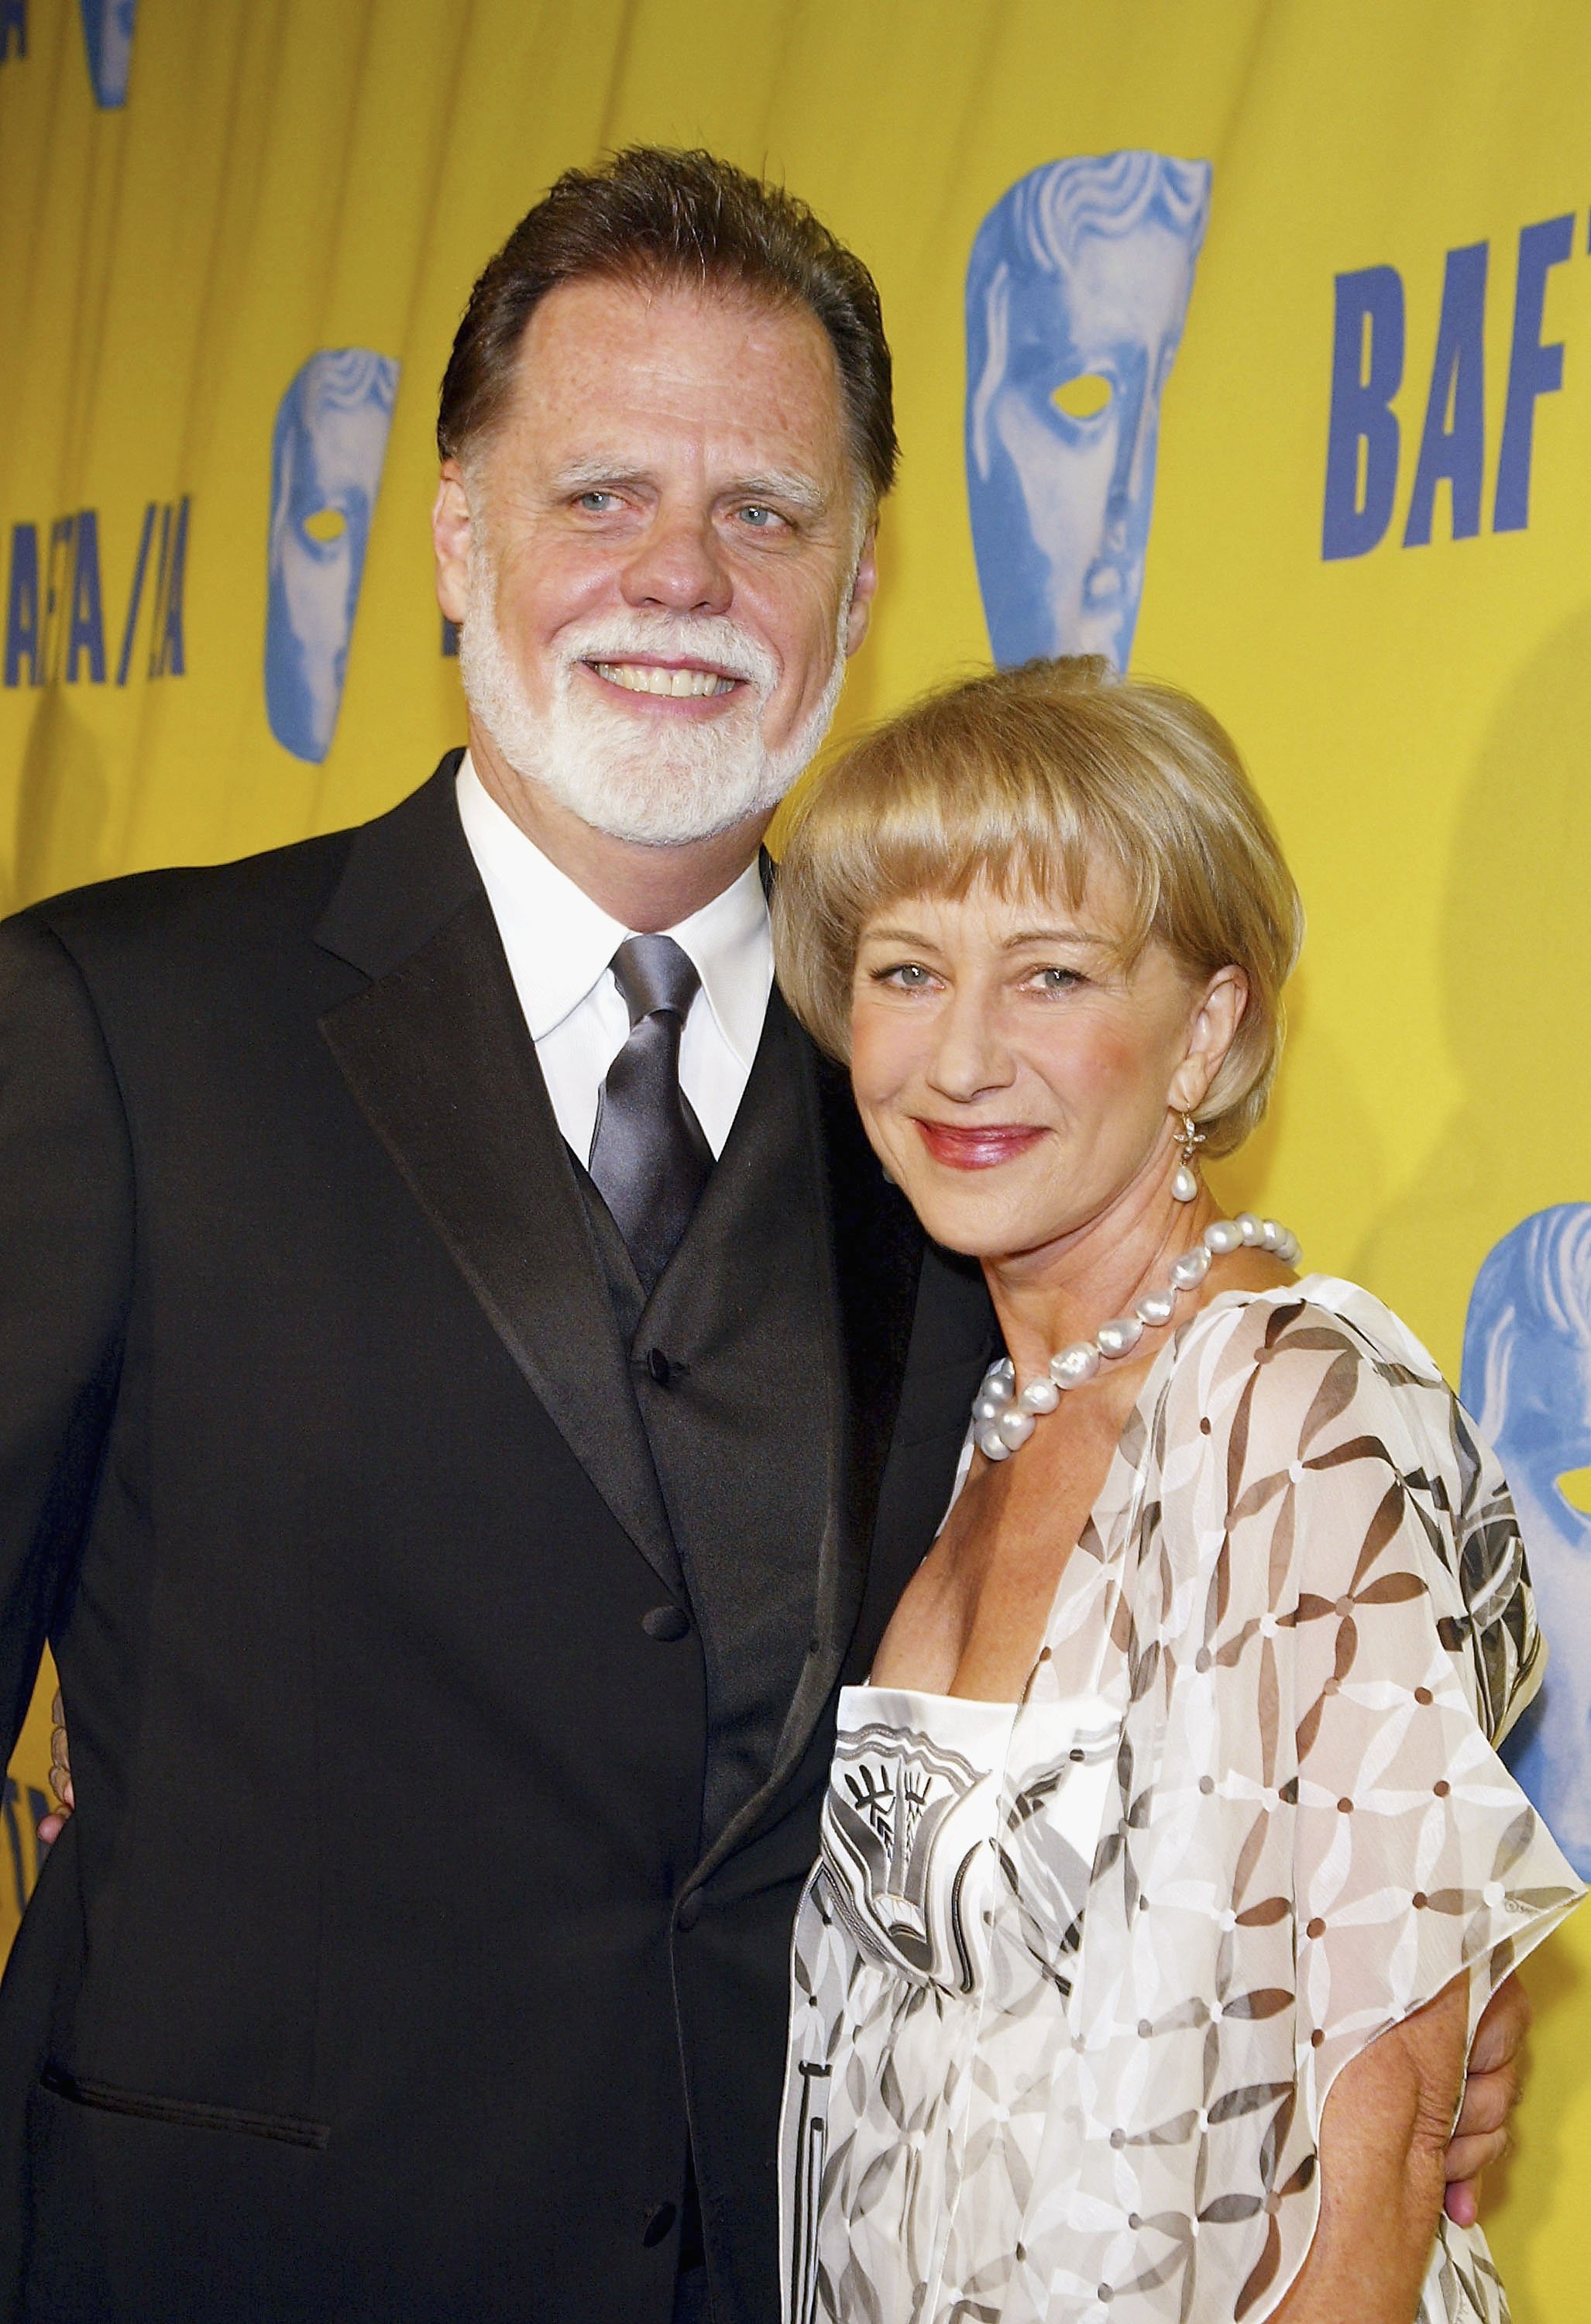 Taylor Hackford and Helen Mirren at the 13th Annual BAFTA/LA Britannia Awards on November 4, 2004, in Beverly Hills, California | Source: Getty Images